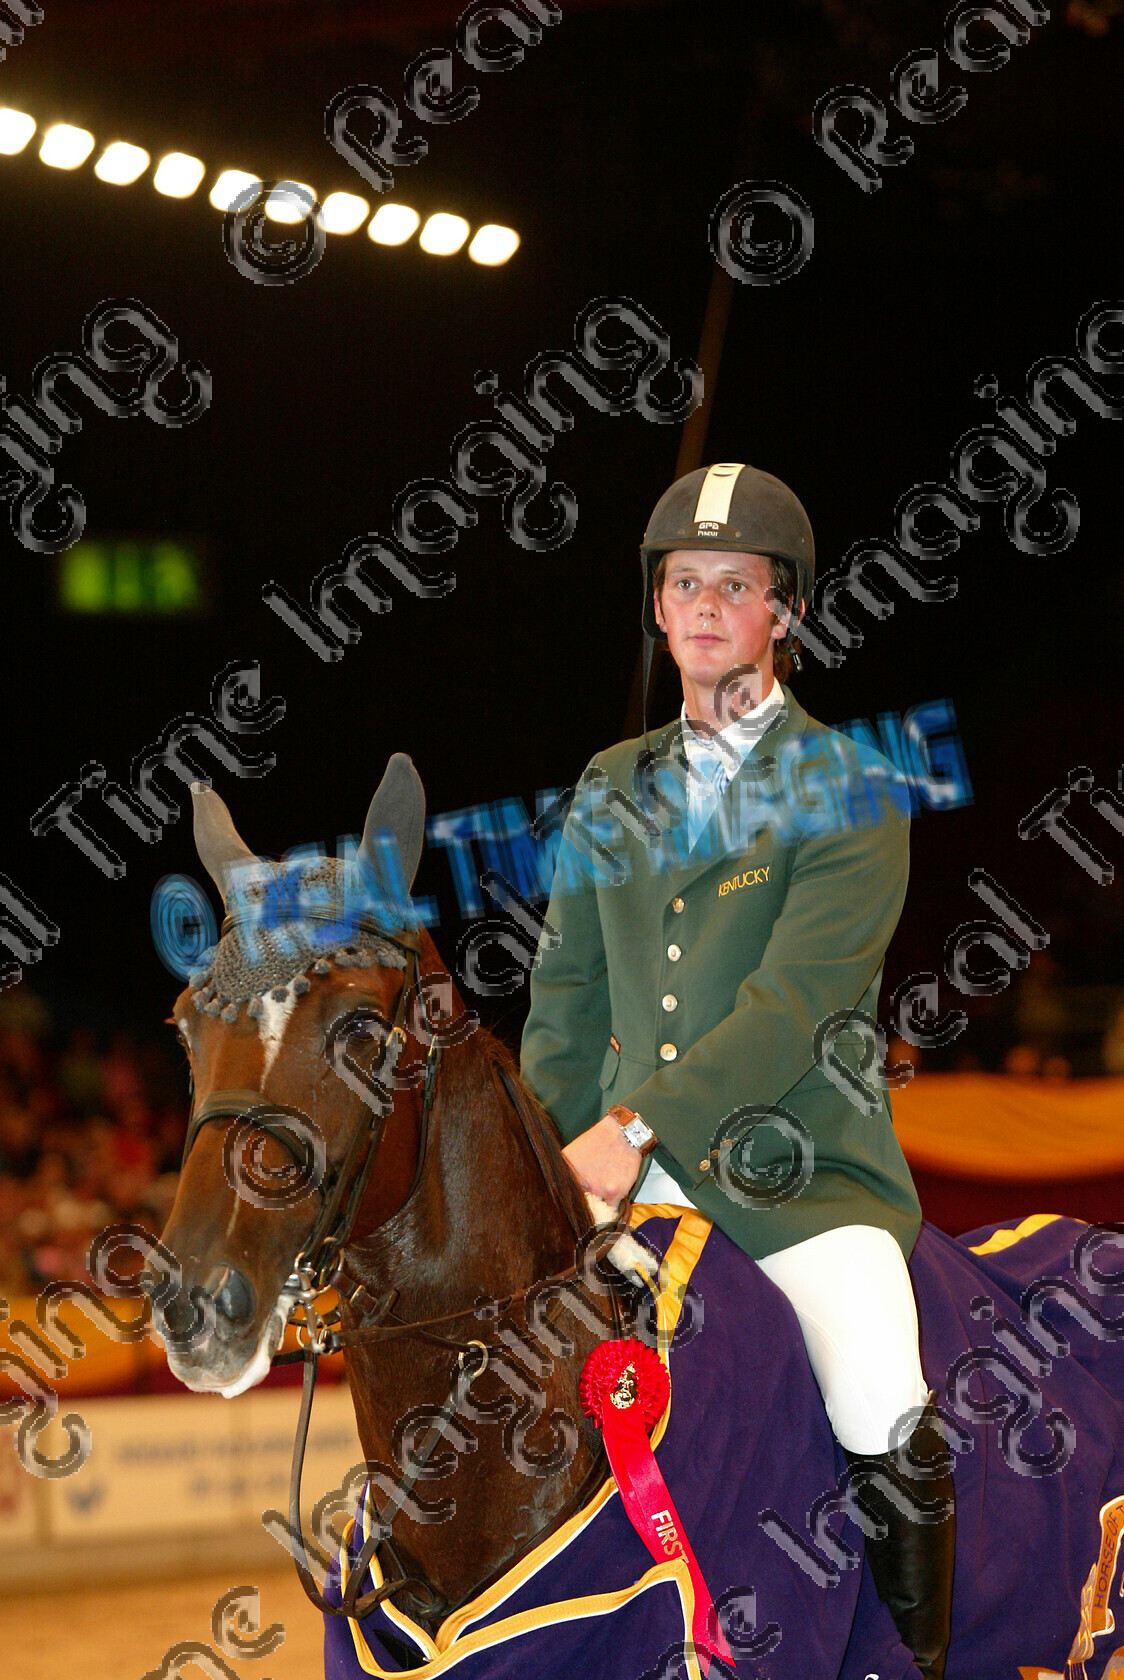 S05-67-T7-061 
 HOYS 2005: The Zinc Management Cup winner 
 Keywords: horse of the year show 2005 05 hoys saturday 15 10 october 21 Zinc Management Cup winner 95 Intermission Billy Twomey chestnut mare standing presentation rug trophy rosette showjumping showjumper